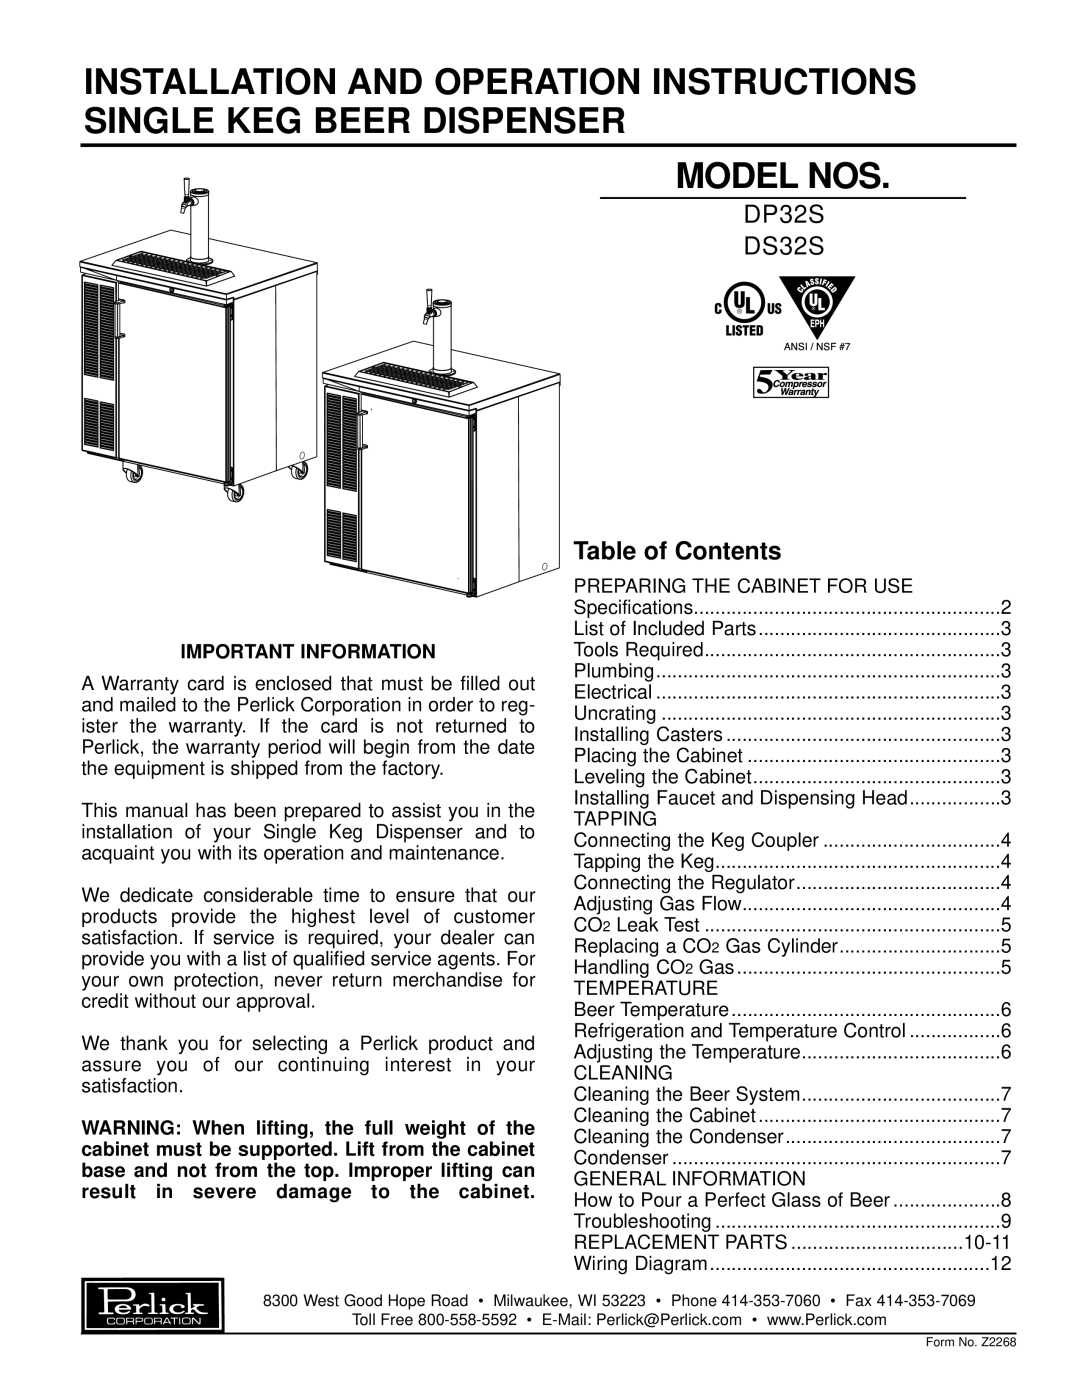 Perlick specifications Important Information, Model Nos, DP32S DS32S, Table of Contents 